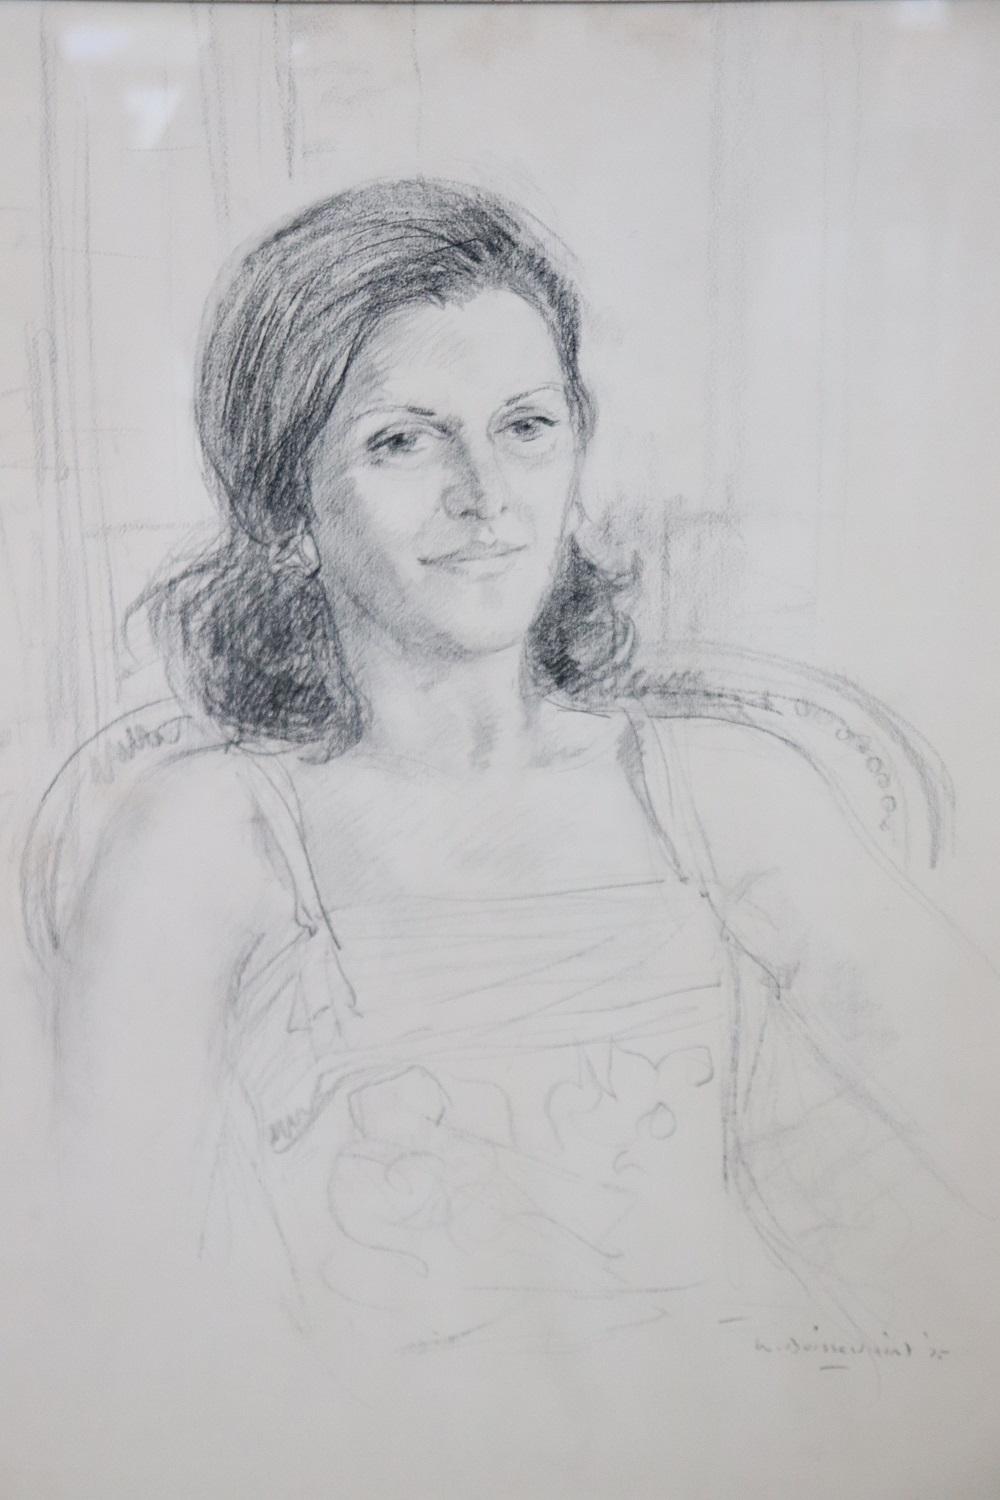 Beautiful portrait pancil on paper dated 1975s and signed by William Boissevain.
William Boissevain born 1927s in New York.
Studies in Paris and London.
The son of a Dutch diplomat, Boissevain studied in Paris and London before coming to